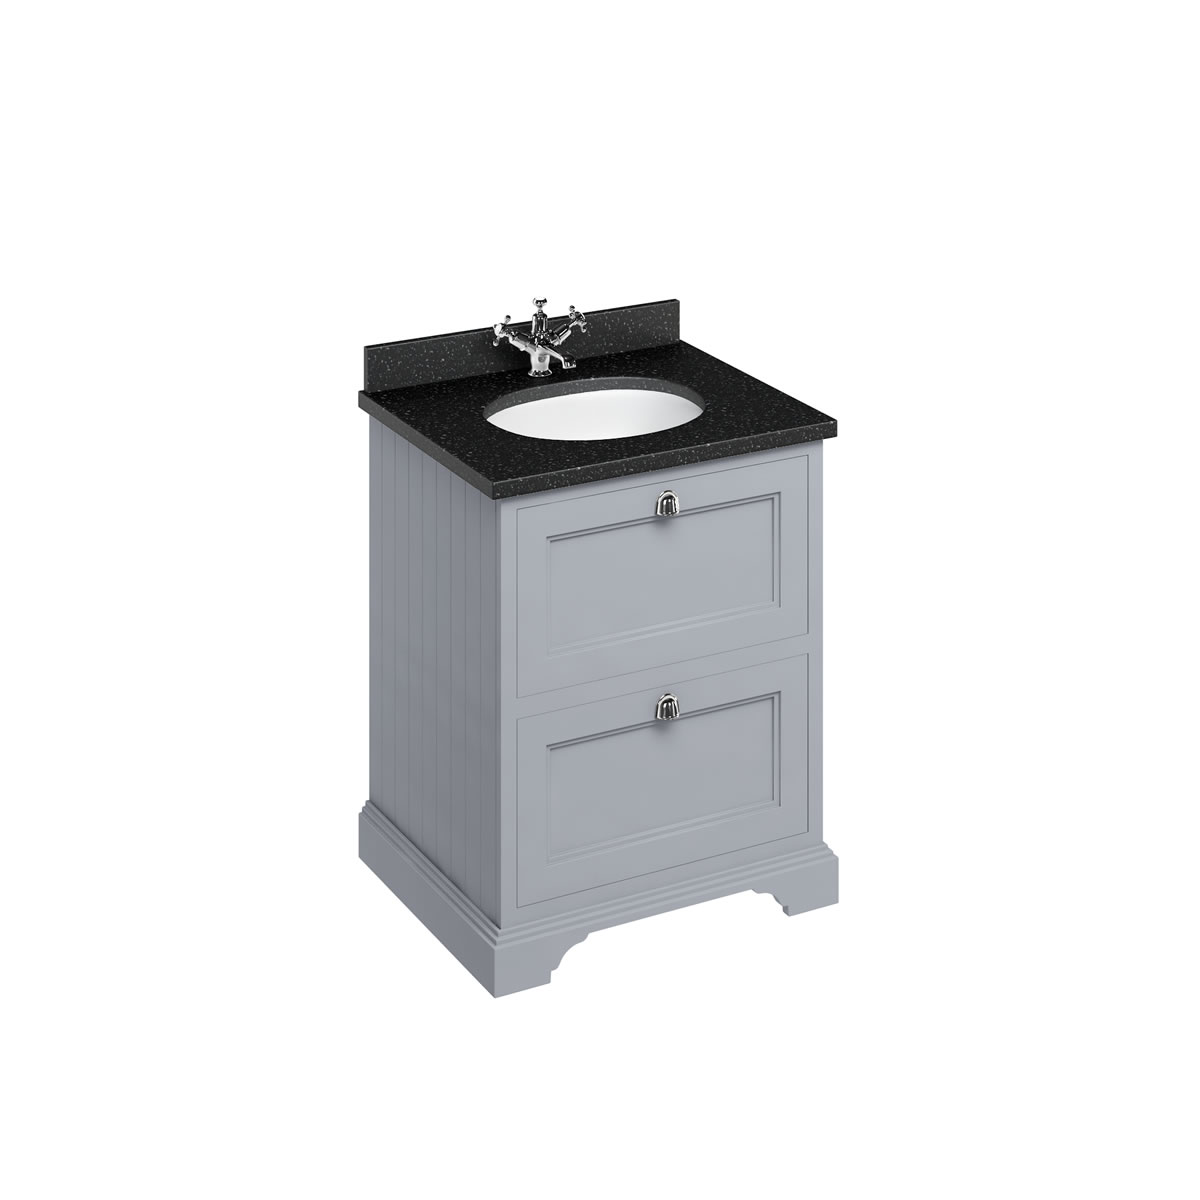 Freestanding 65 Vanity Unit with 2 drawers - Classic Grey and Minerva black granite worktop with integrated white basin 